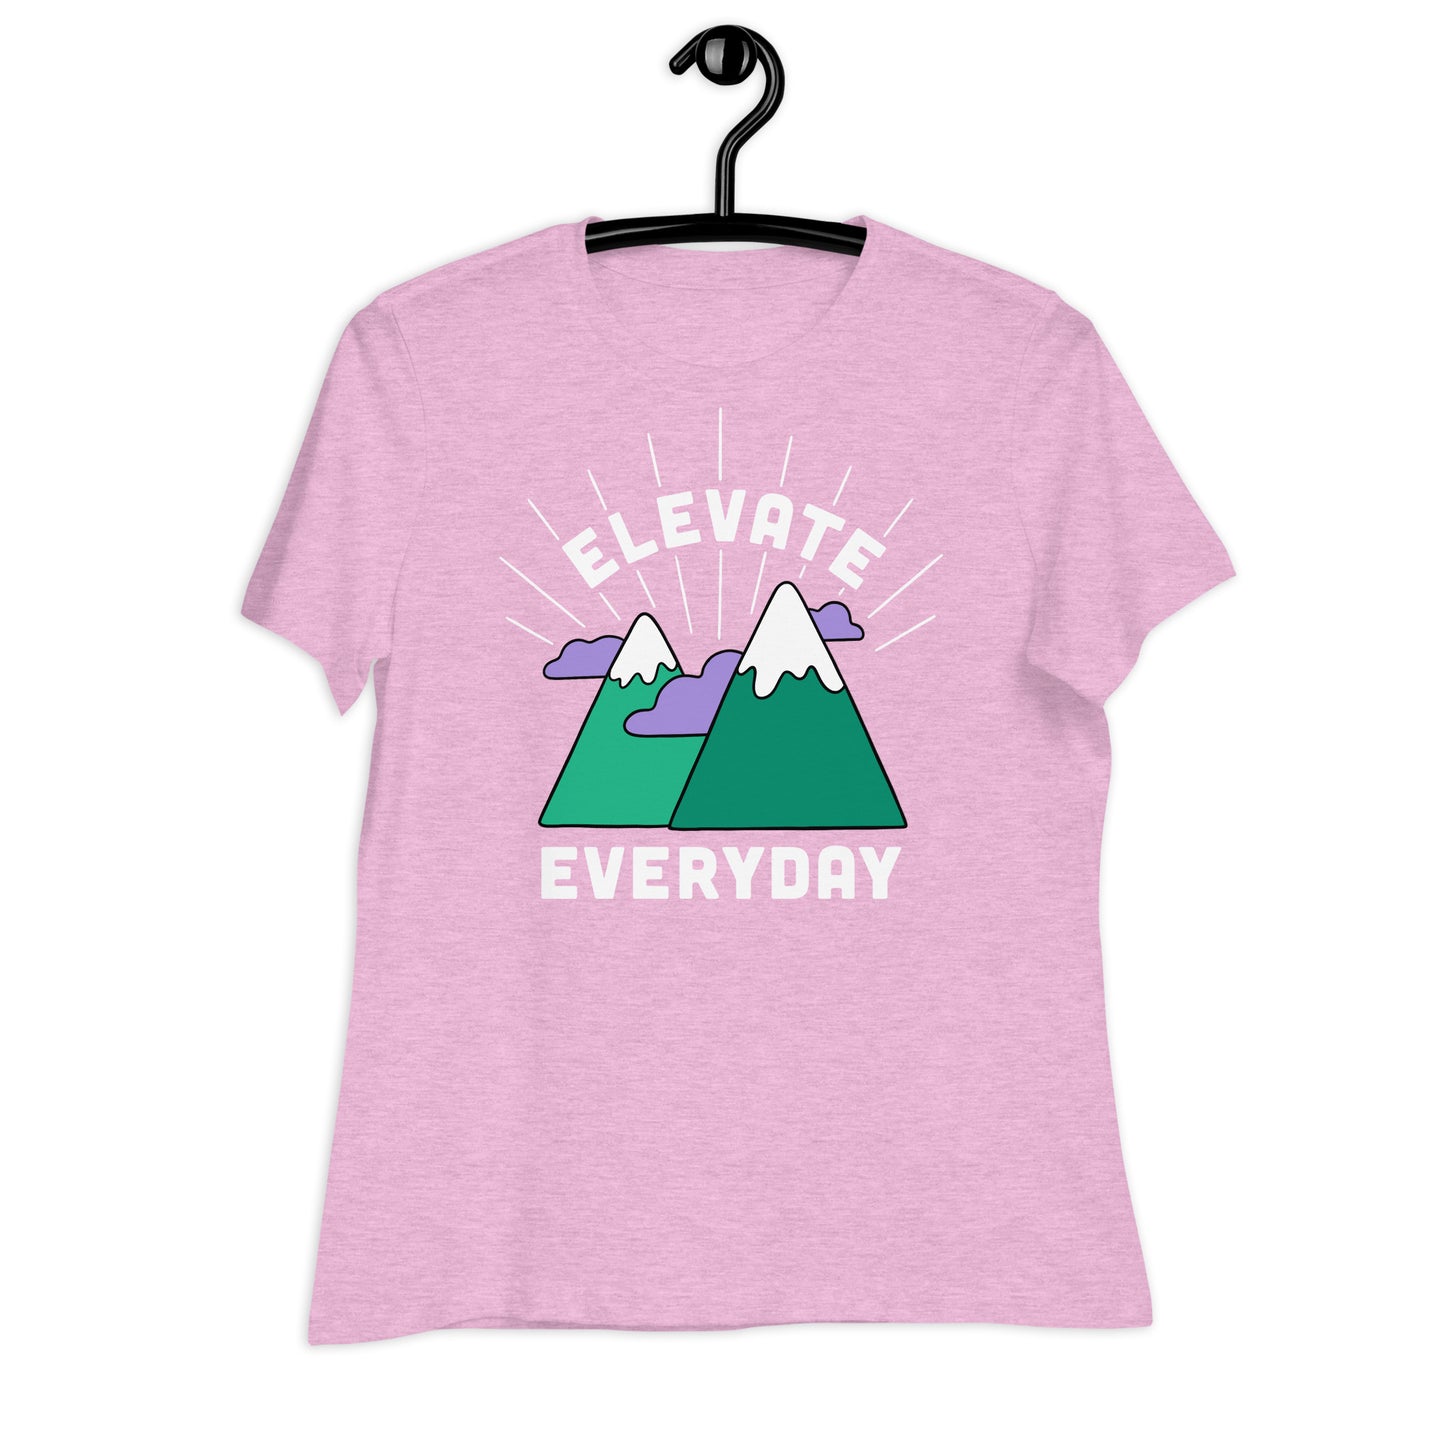 Elevate Everyday — Women's Relaxed Tee